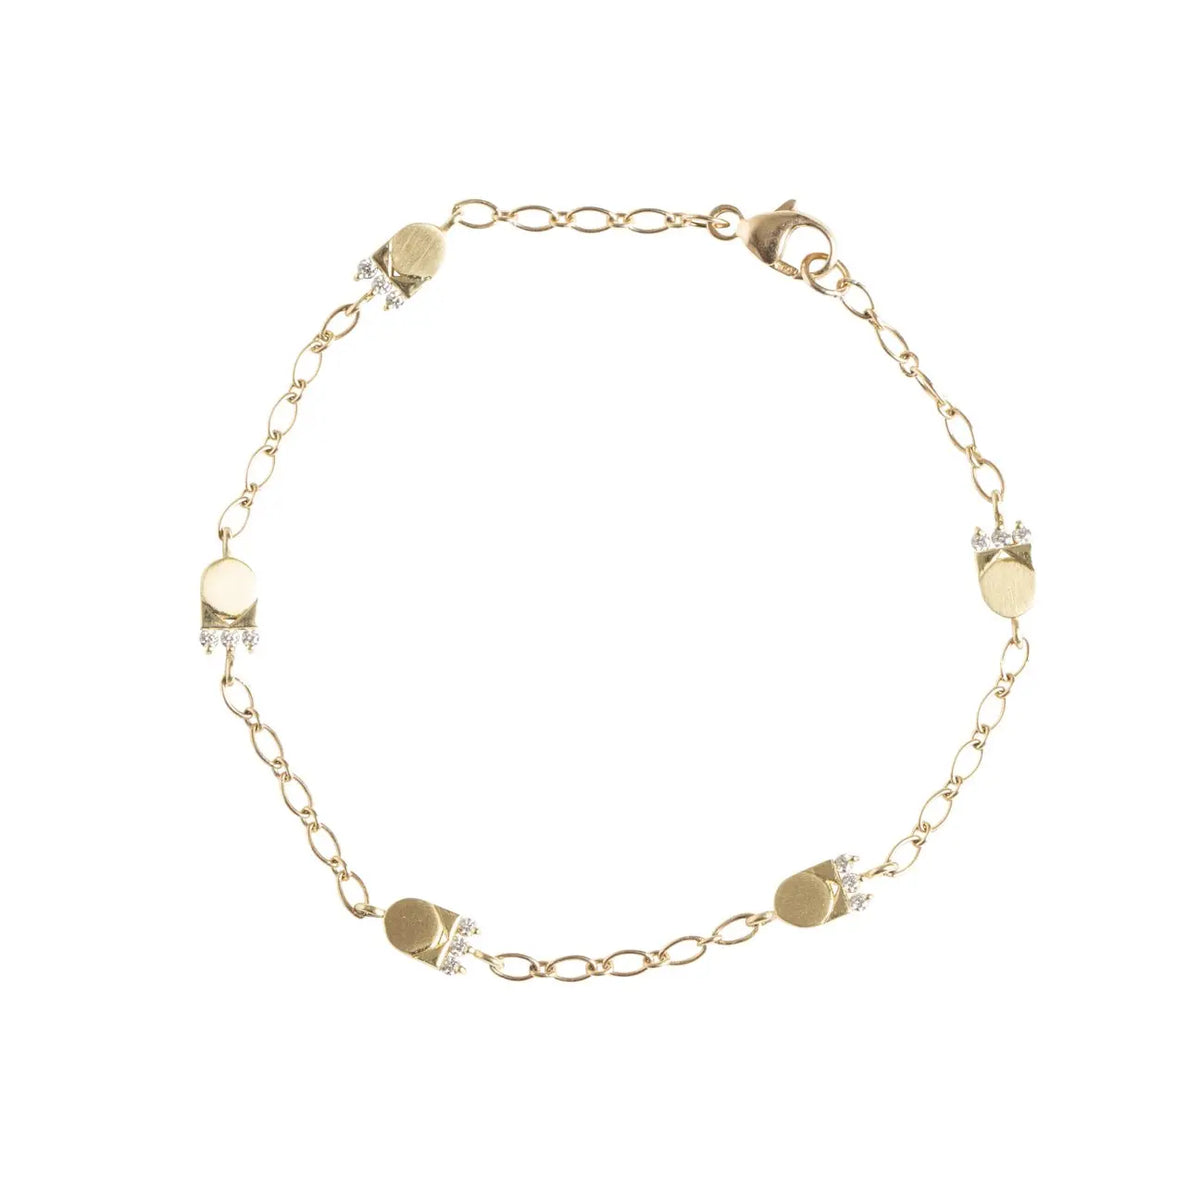 The Crown bracelet will make you feel like pure royalty. Wrap your wrist up in this perfectly dainty bracelet and add just the right amount of sparkle to your stack.    15 round ethically sourced diamonds  Total carat weight: .15 18K recycled yellow gold Measurements: 6.8mm/.27in tall, 4.3mm/.17in wide, 2.1mm/.08in deep (each station on the bracelet) 18K lobster clasp and oval cable chain bracelet is adjustable up to 7.25 inches Designed by Alex Fitz